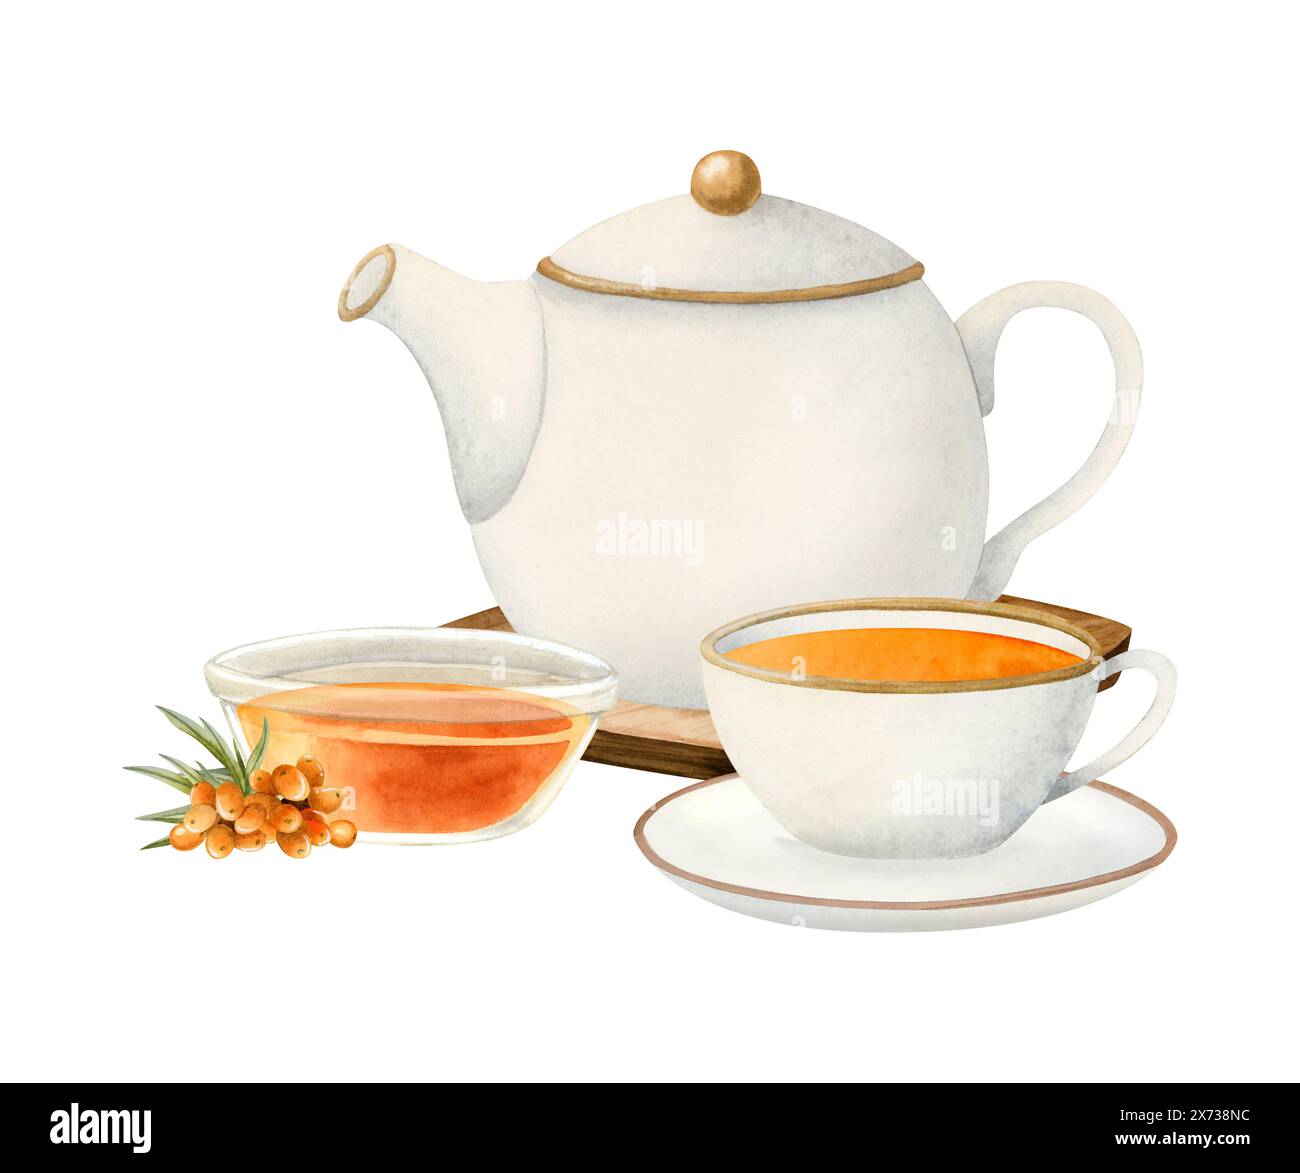 Tea party with white teapot, herbal sea buckthorn jam and orange tea in elegant cup watercolor illustration Stock Photo